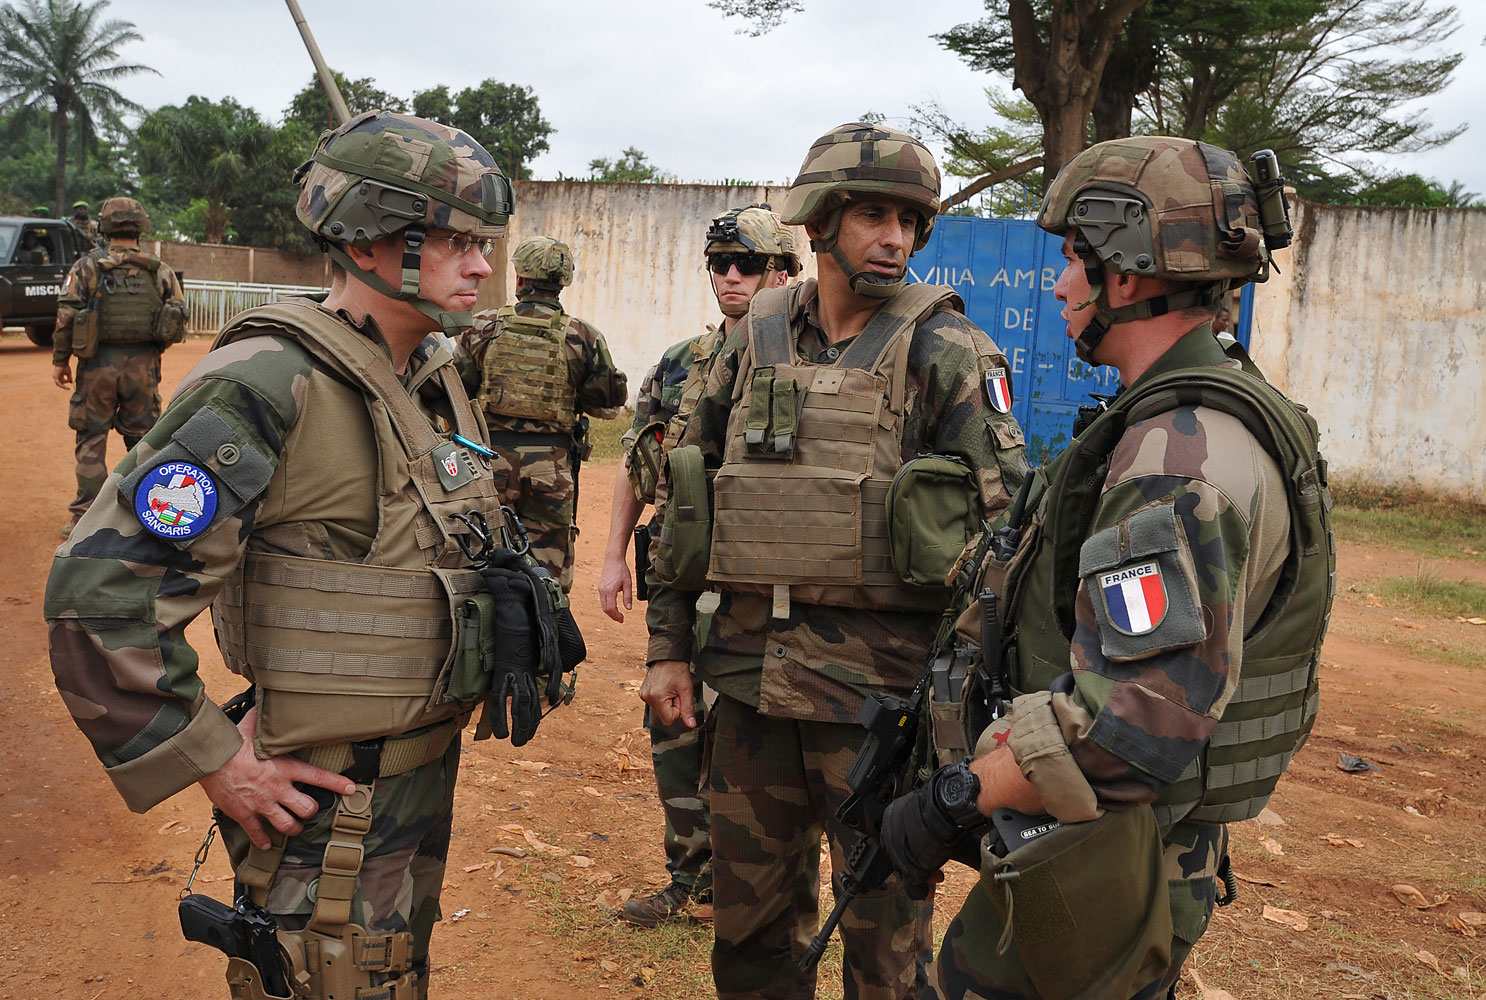 The commander of the French Sangaris operation in Central Africa Francisco Soriano (C) speaks with two soldier in the PK4 district of Bangui on February 27, 2014. The EU has announced that its proposed contingent of troops will soon join African Union and French troops currently deployed in the country. (Sia Kambou—AFP/Getty Images)